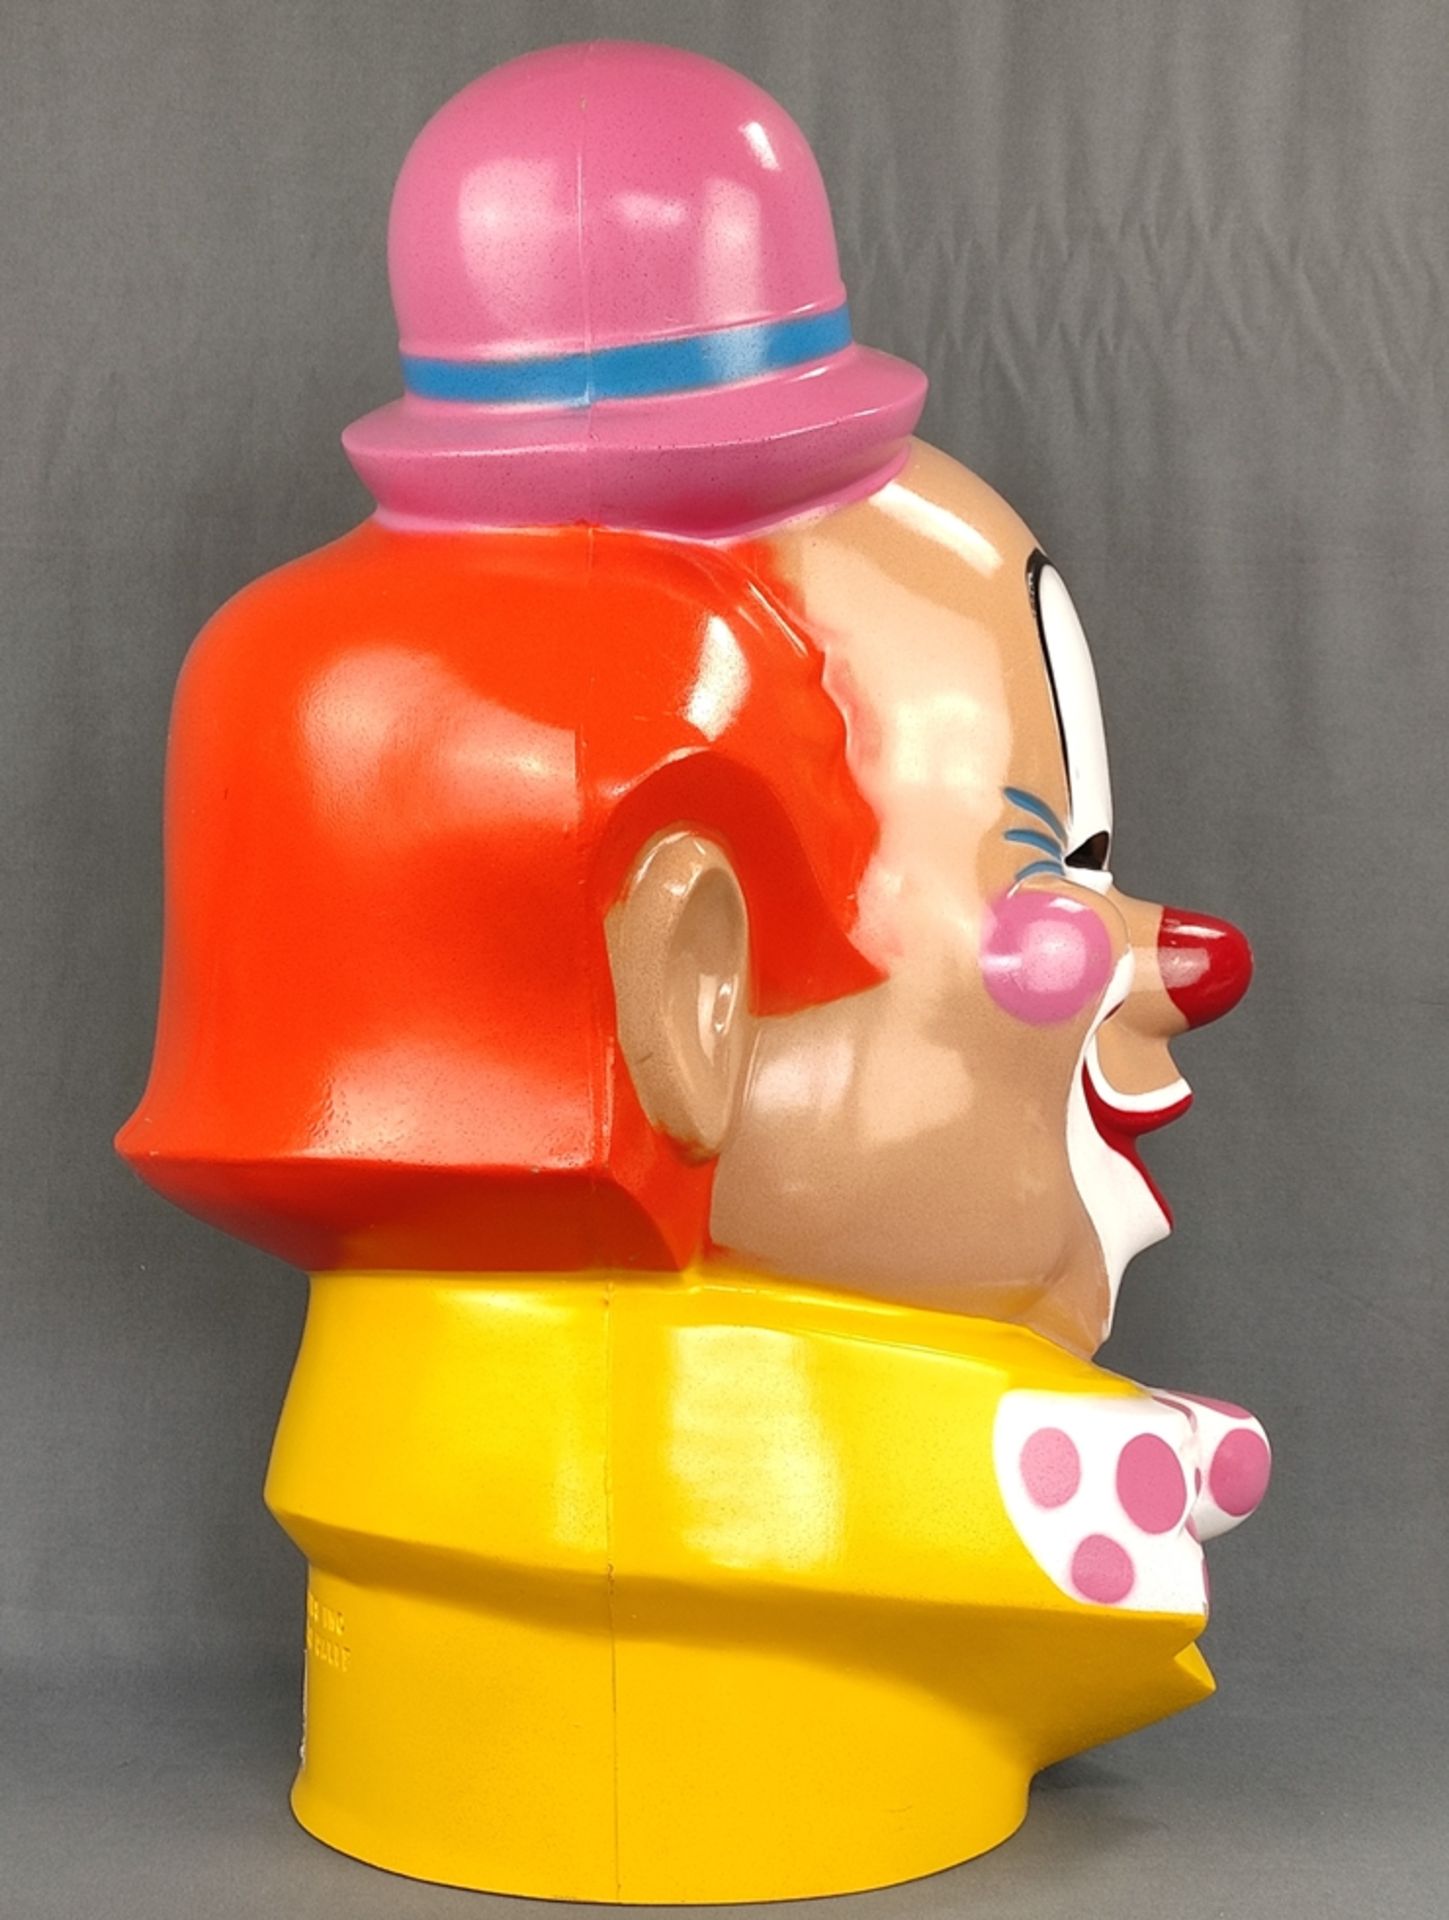 Clown head as balloon inflator, balloon inflator, 1974, Beverly Hills Calif, polychrome, plastic, h - Image 4 of 7